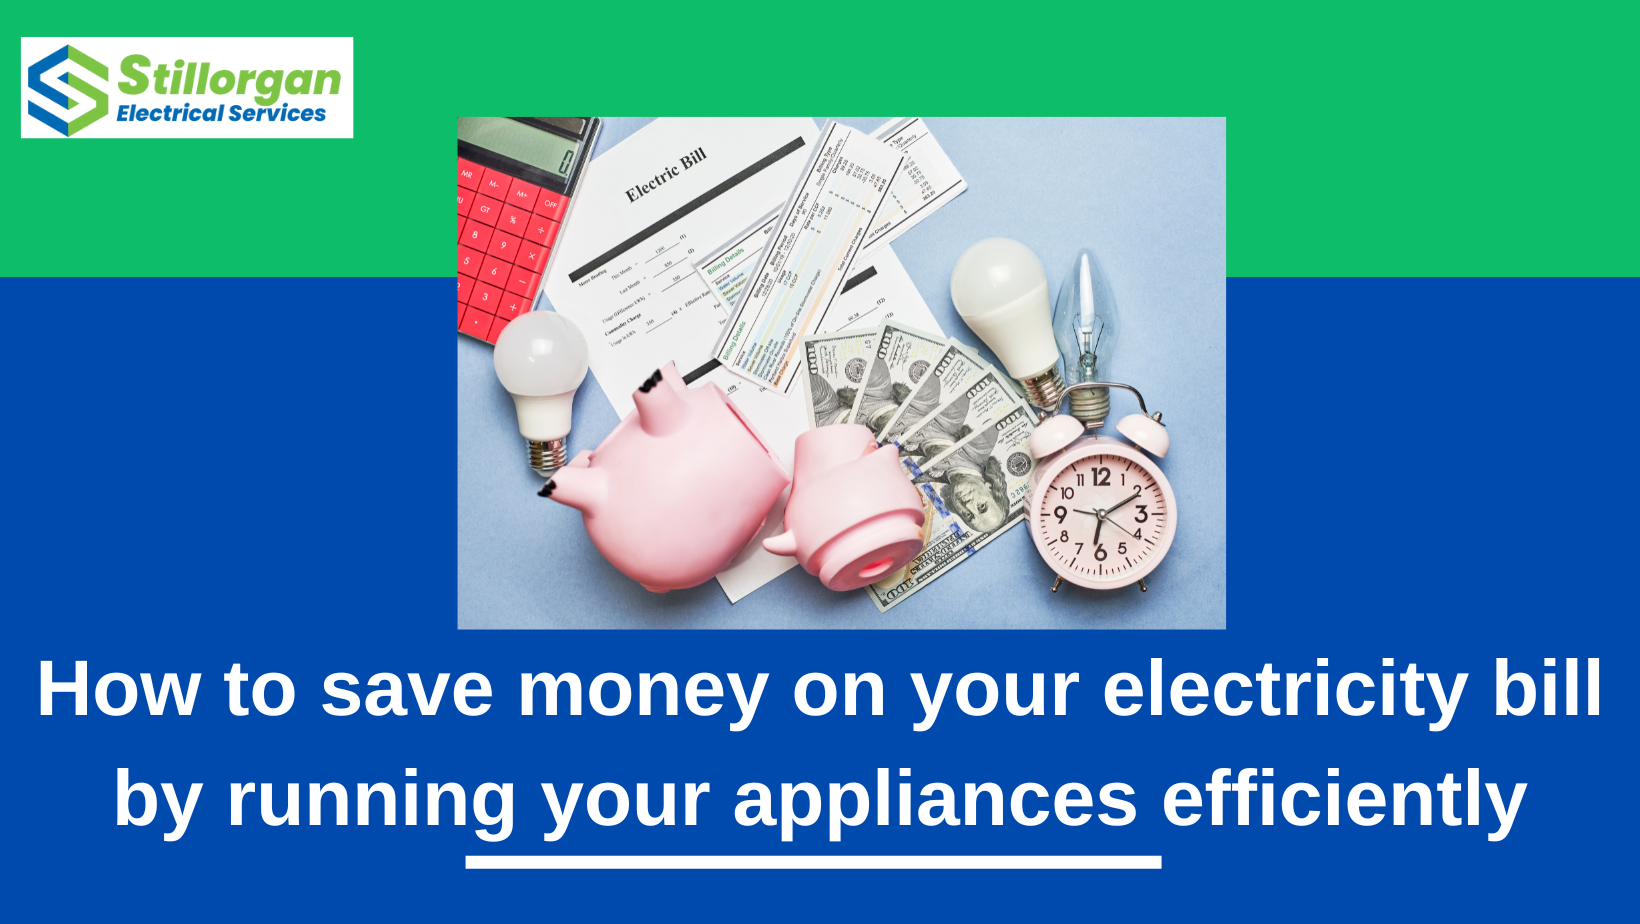 How to save money on your electricity bill by running your appliances efficiently